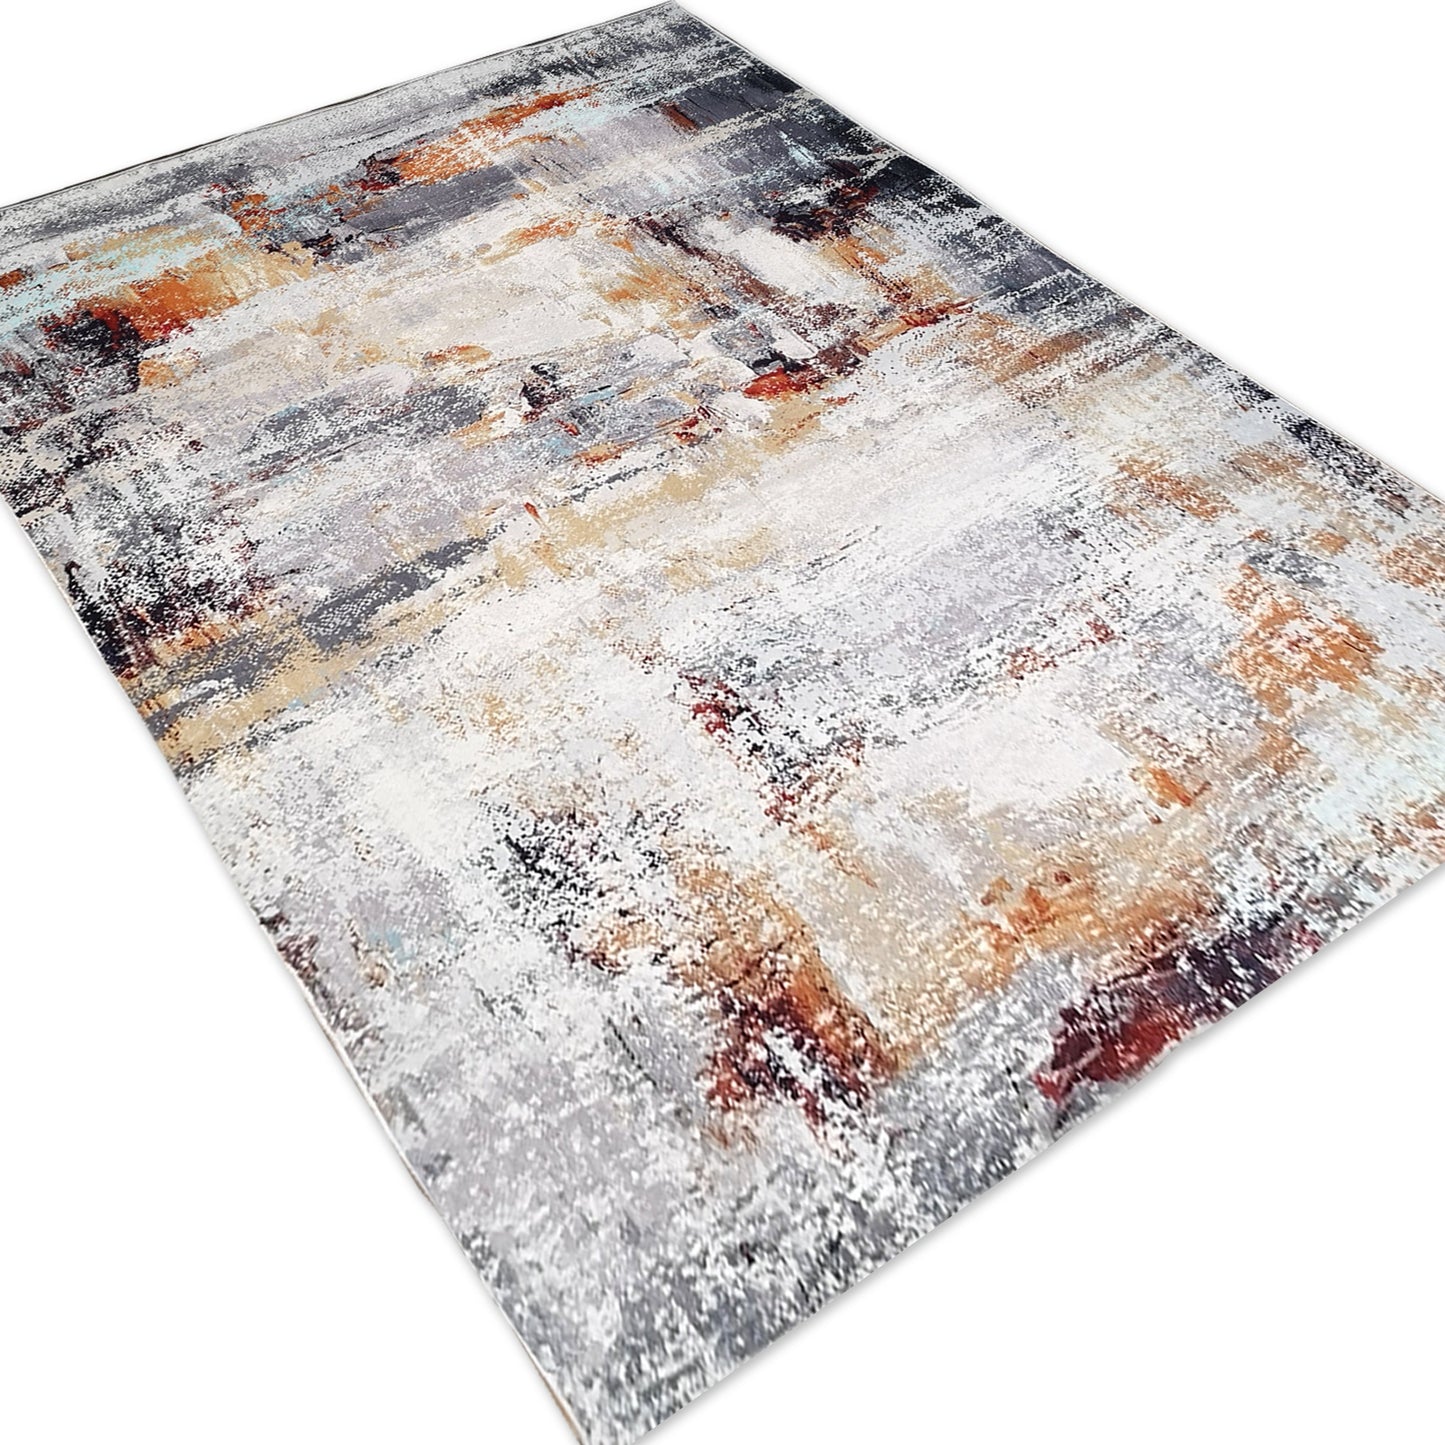 Brown Gray White Cozy Marble Comfortable Multicolor Abstract Soft Fluffy Print Design Area Rug/ Carpet